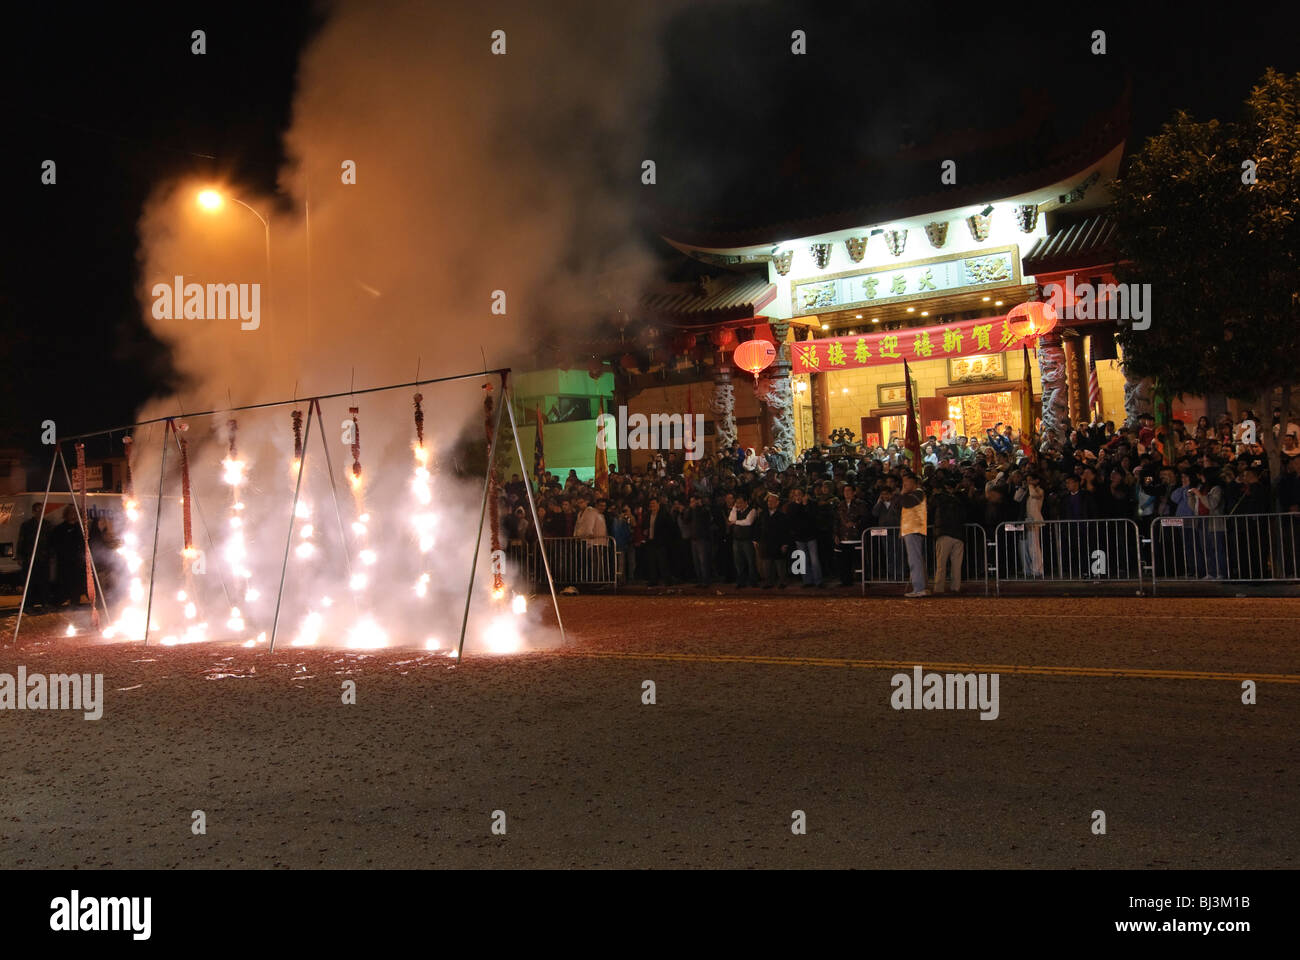 Firecrackers at night during the Chinese New Years Celebration. Stock Photo